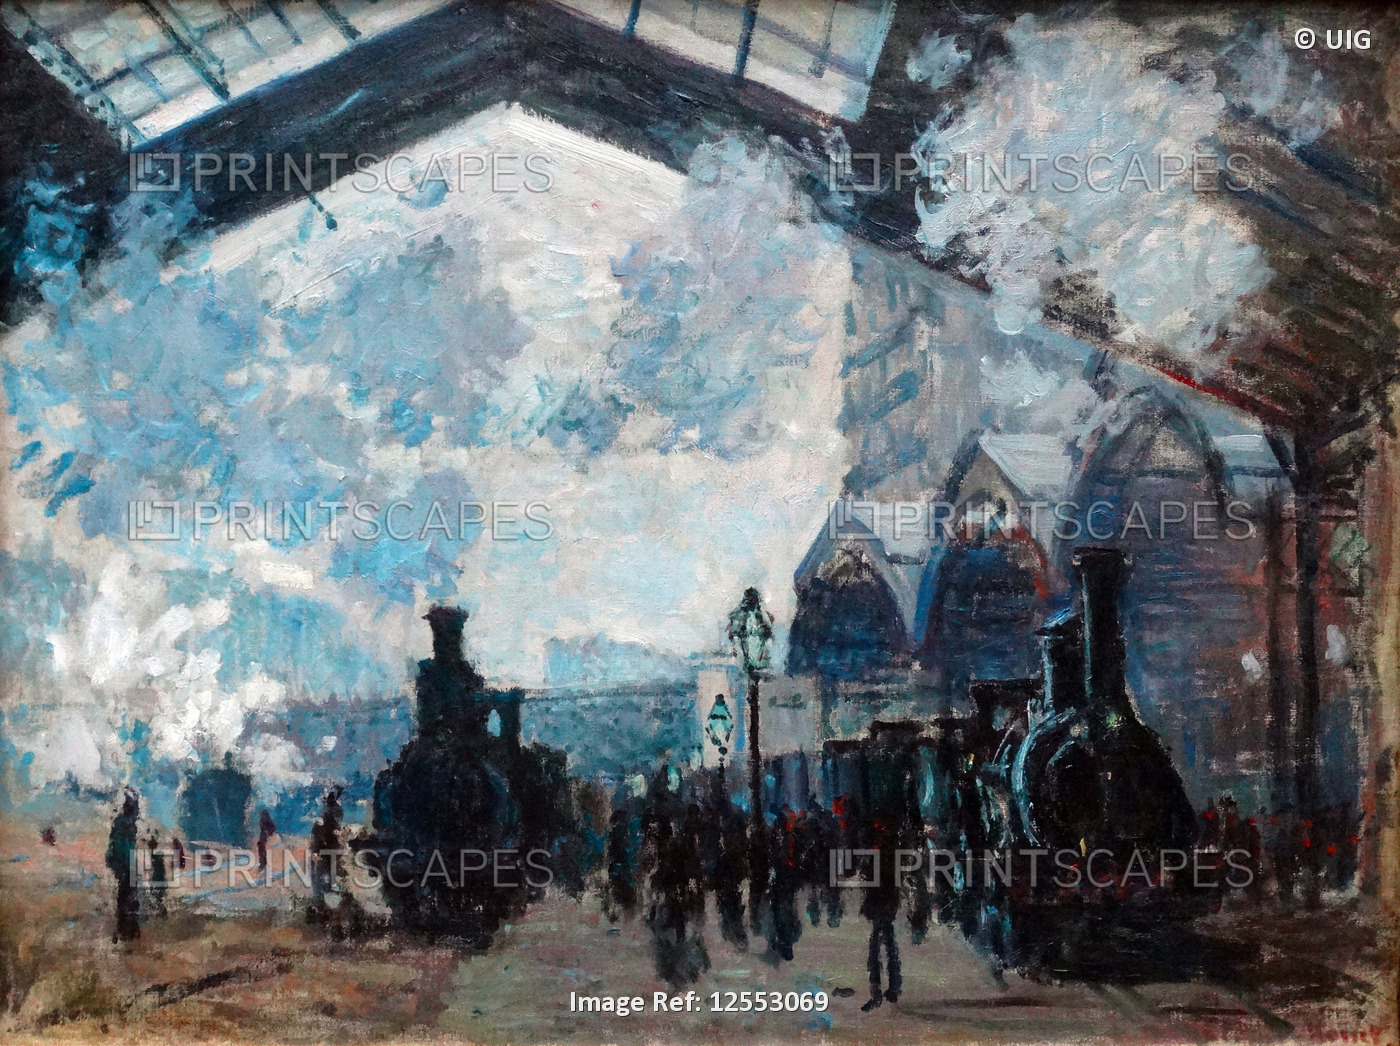 Painting titled 'The Gare Saint-Lazare' by Claude Monet, dated 1877